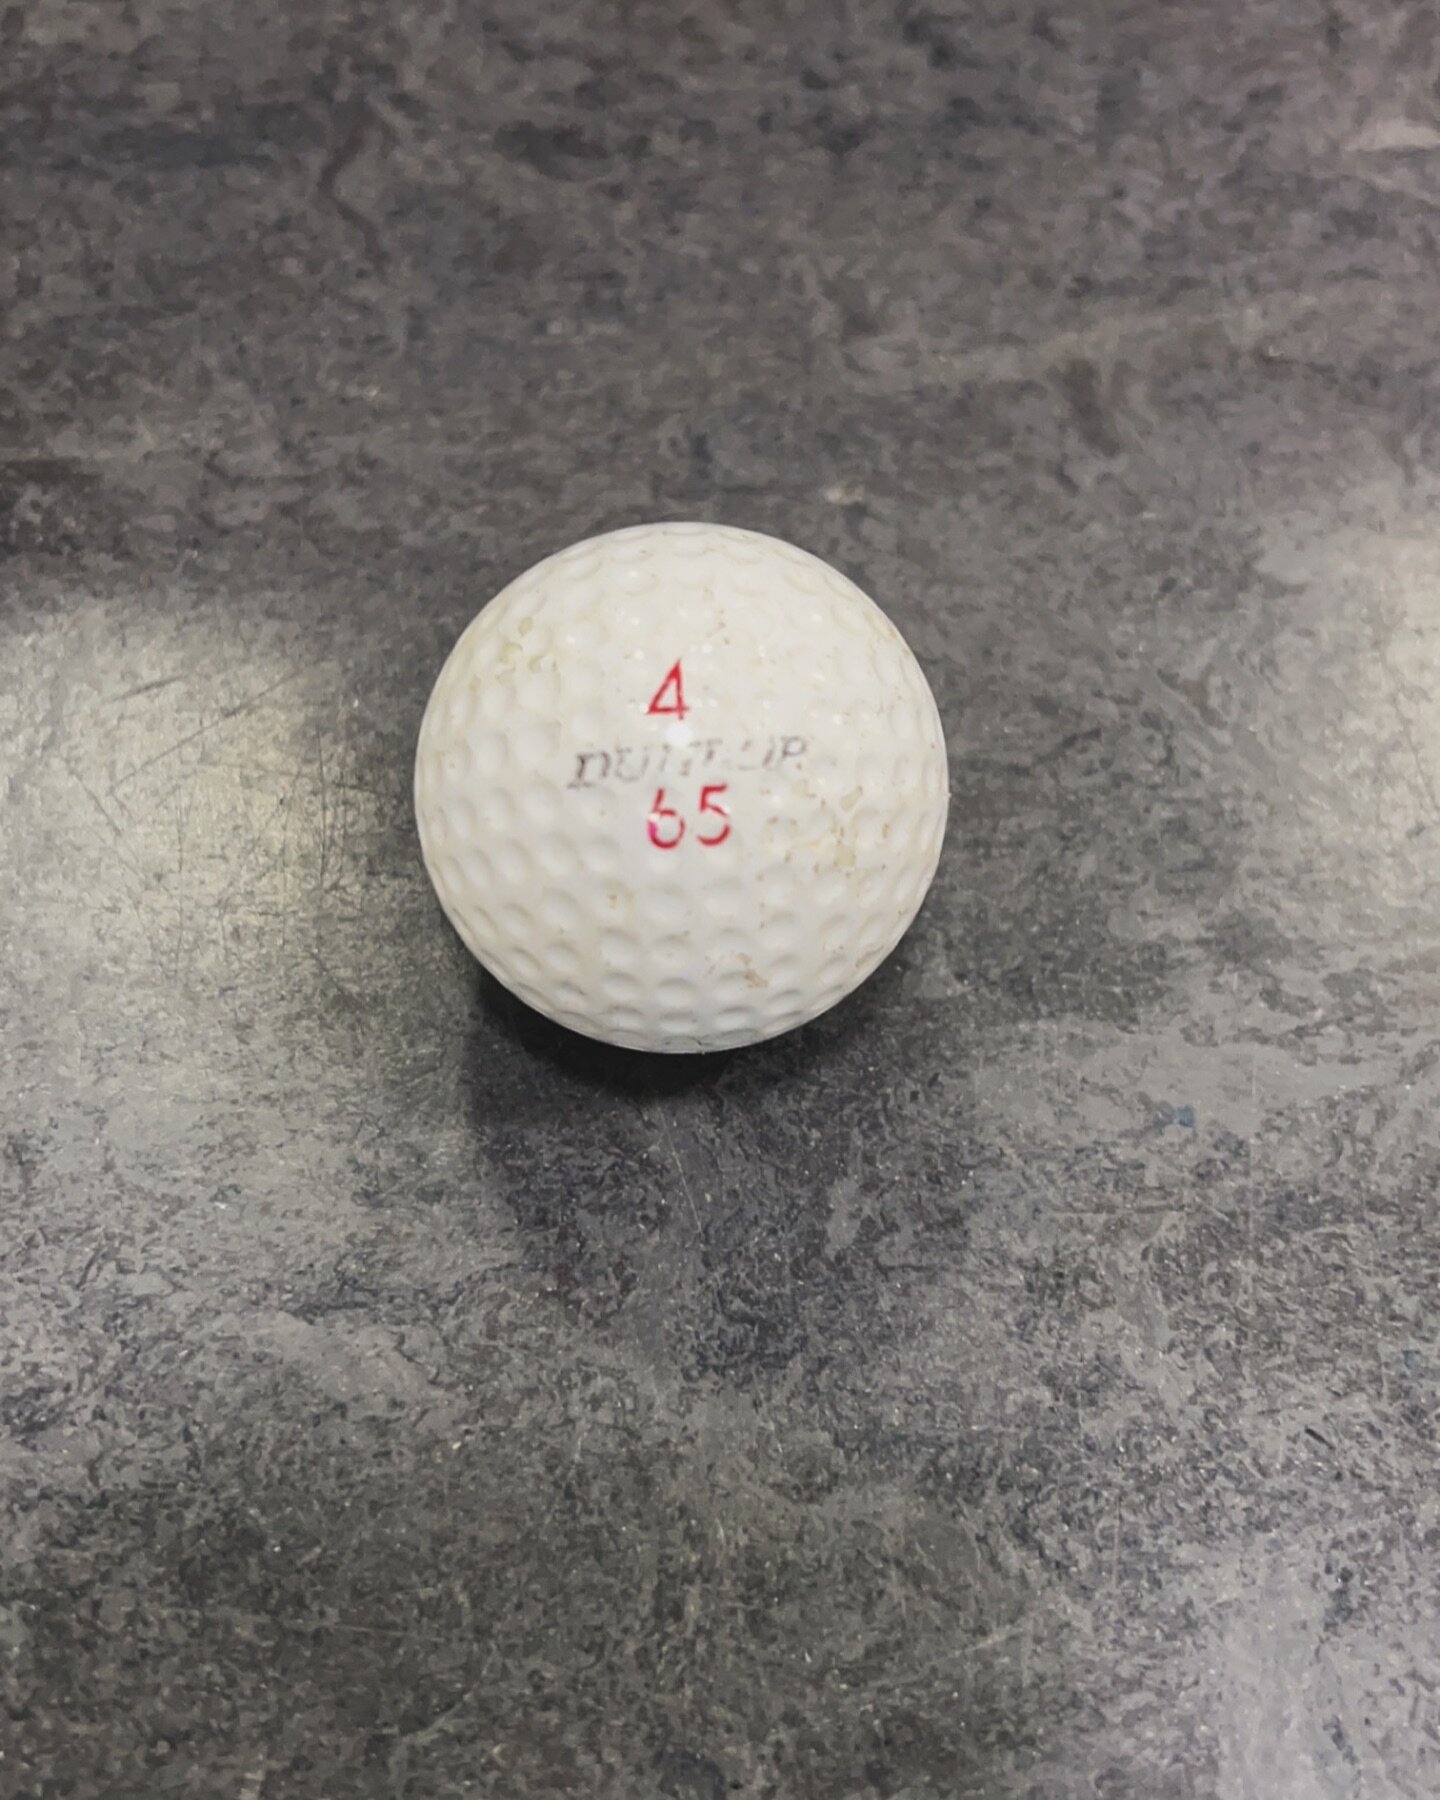 Look what we found today! In 1934, the Dunlop 65 Golf Ball was inspired by Henry Cotton&rsquo;s amazing round at Royal St Georges! 🏌️&zwj;♂️✨ He crushed it and won the Open Championship that year! 🏆🎉 Probably the most popular ball of its day!